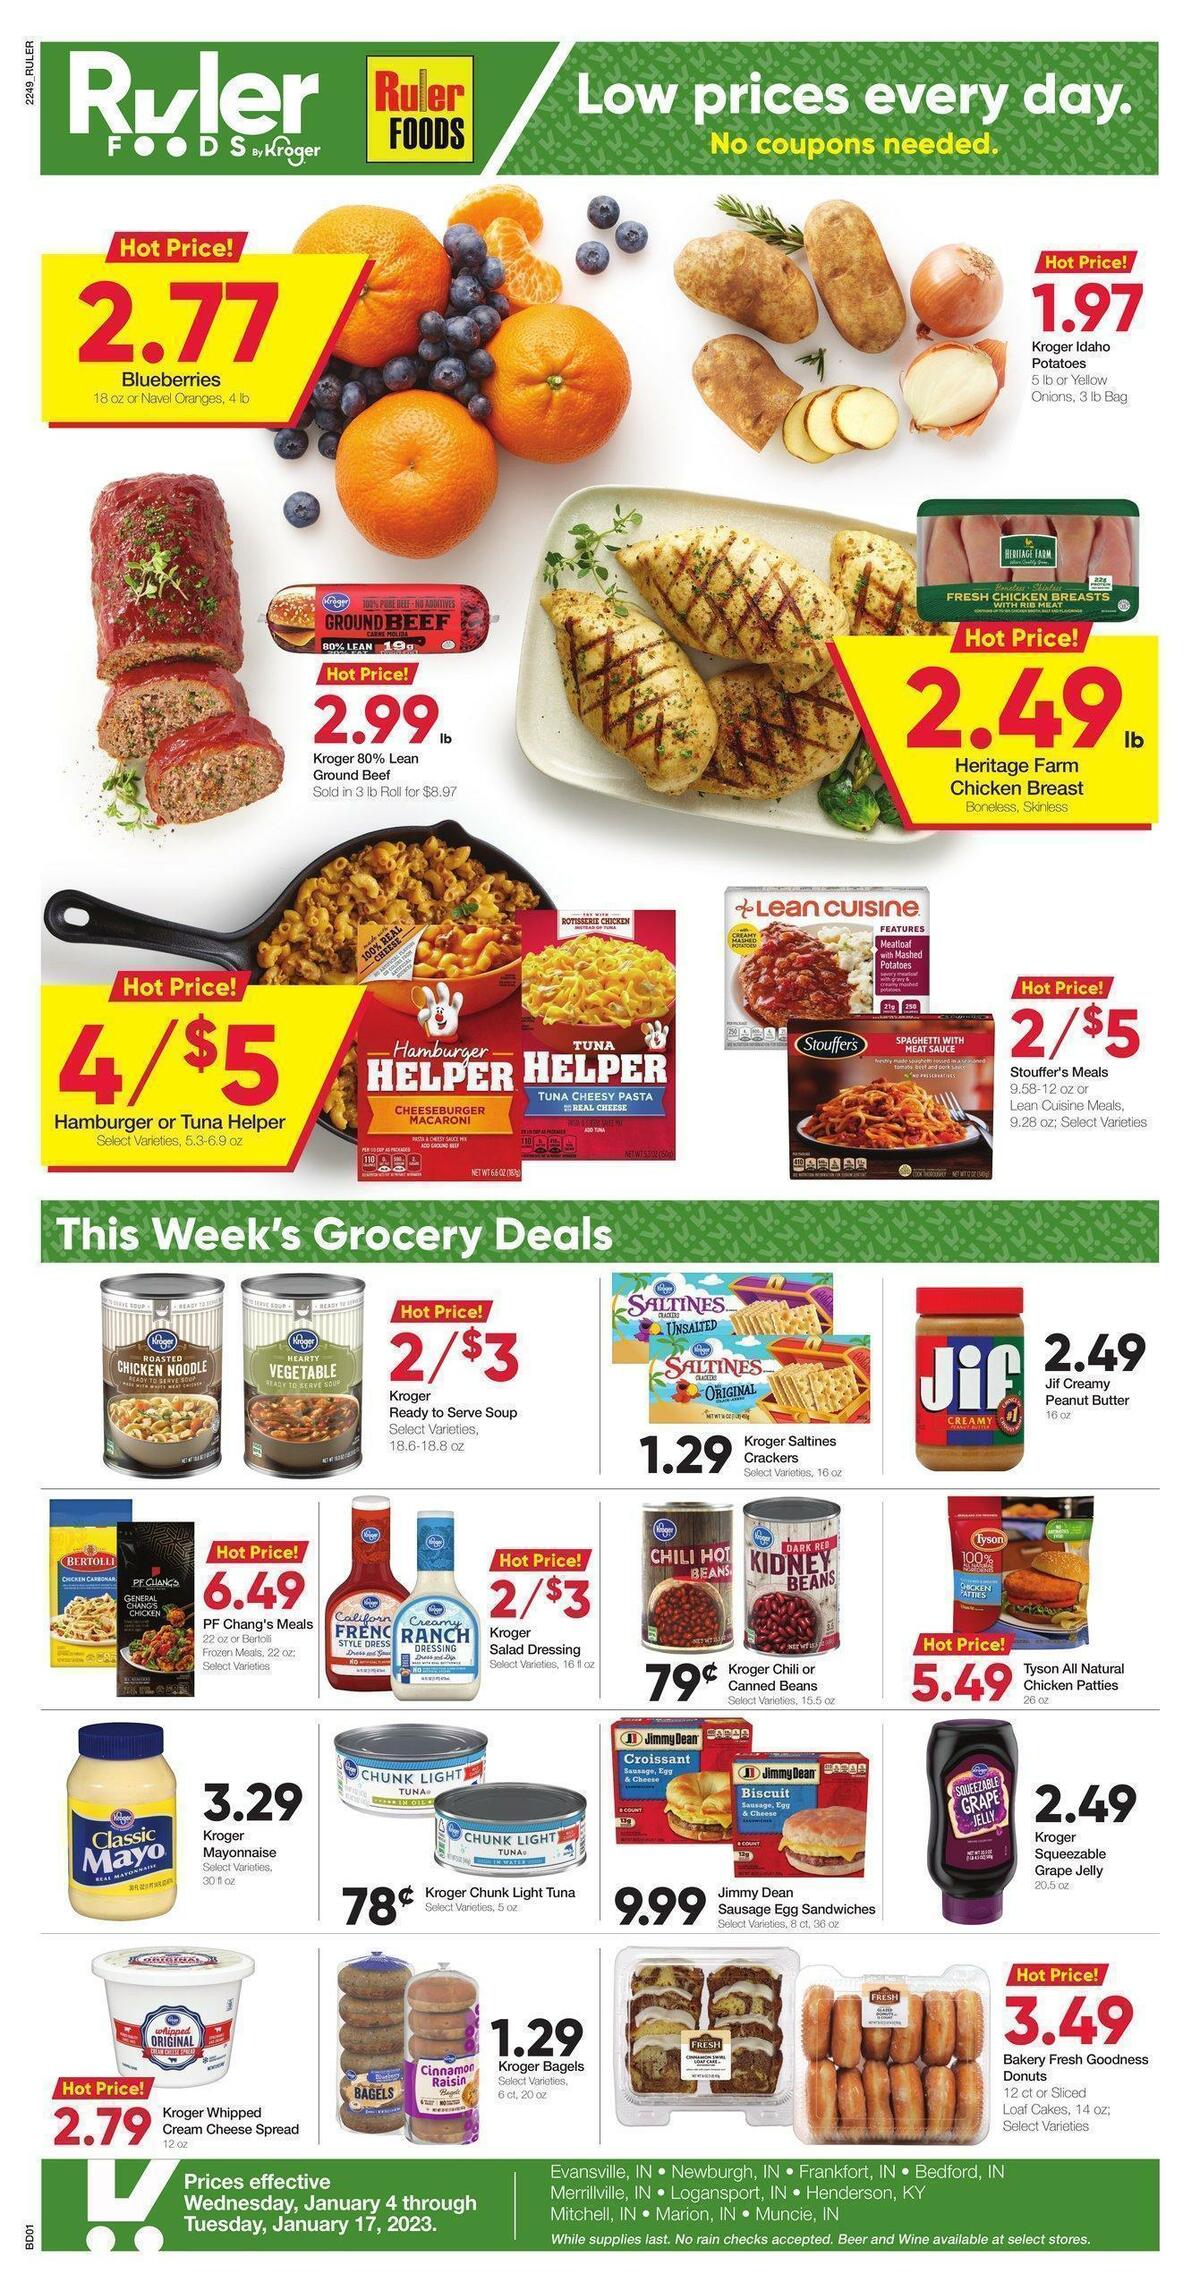 Ruler Foods Weekly Ad from January 4